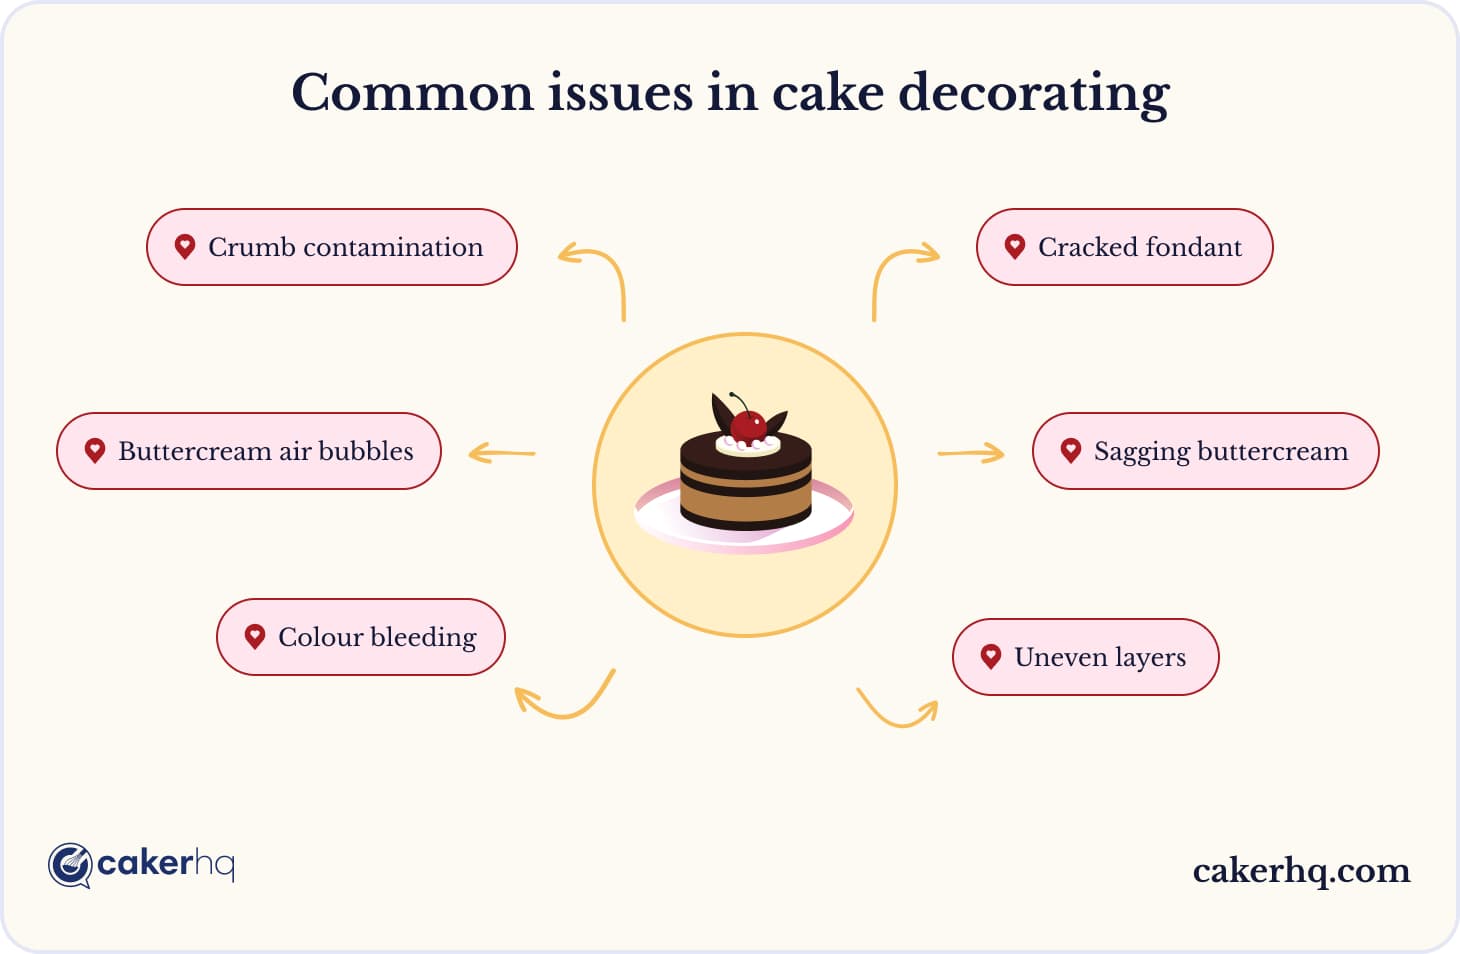 The most popular issues when decorating cakes